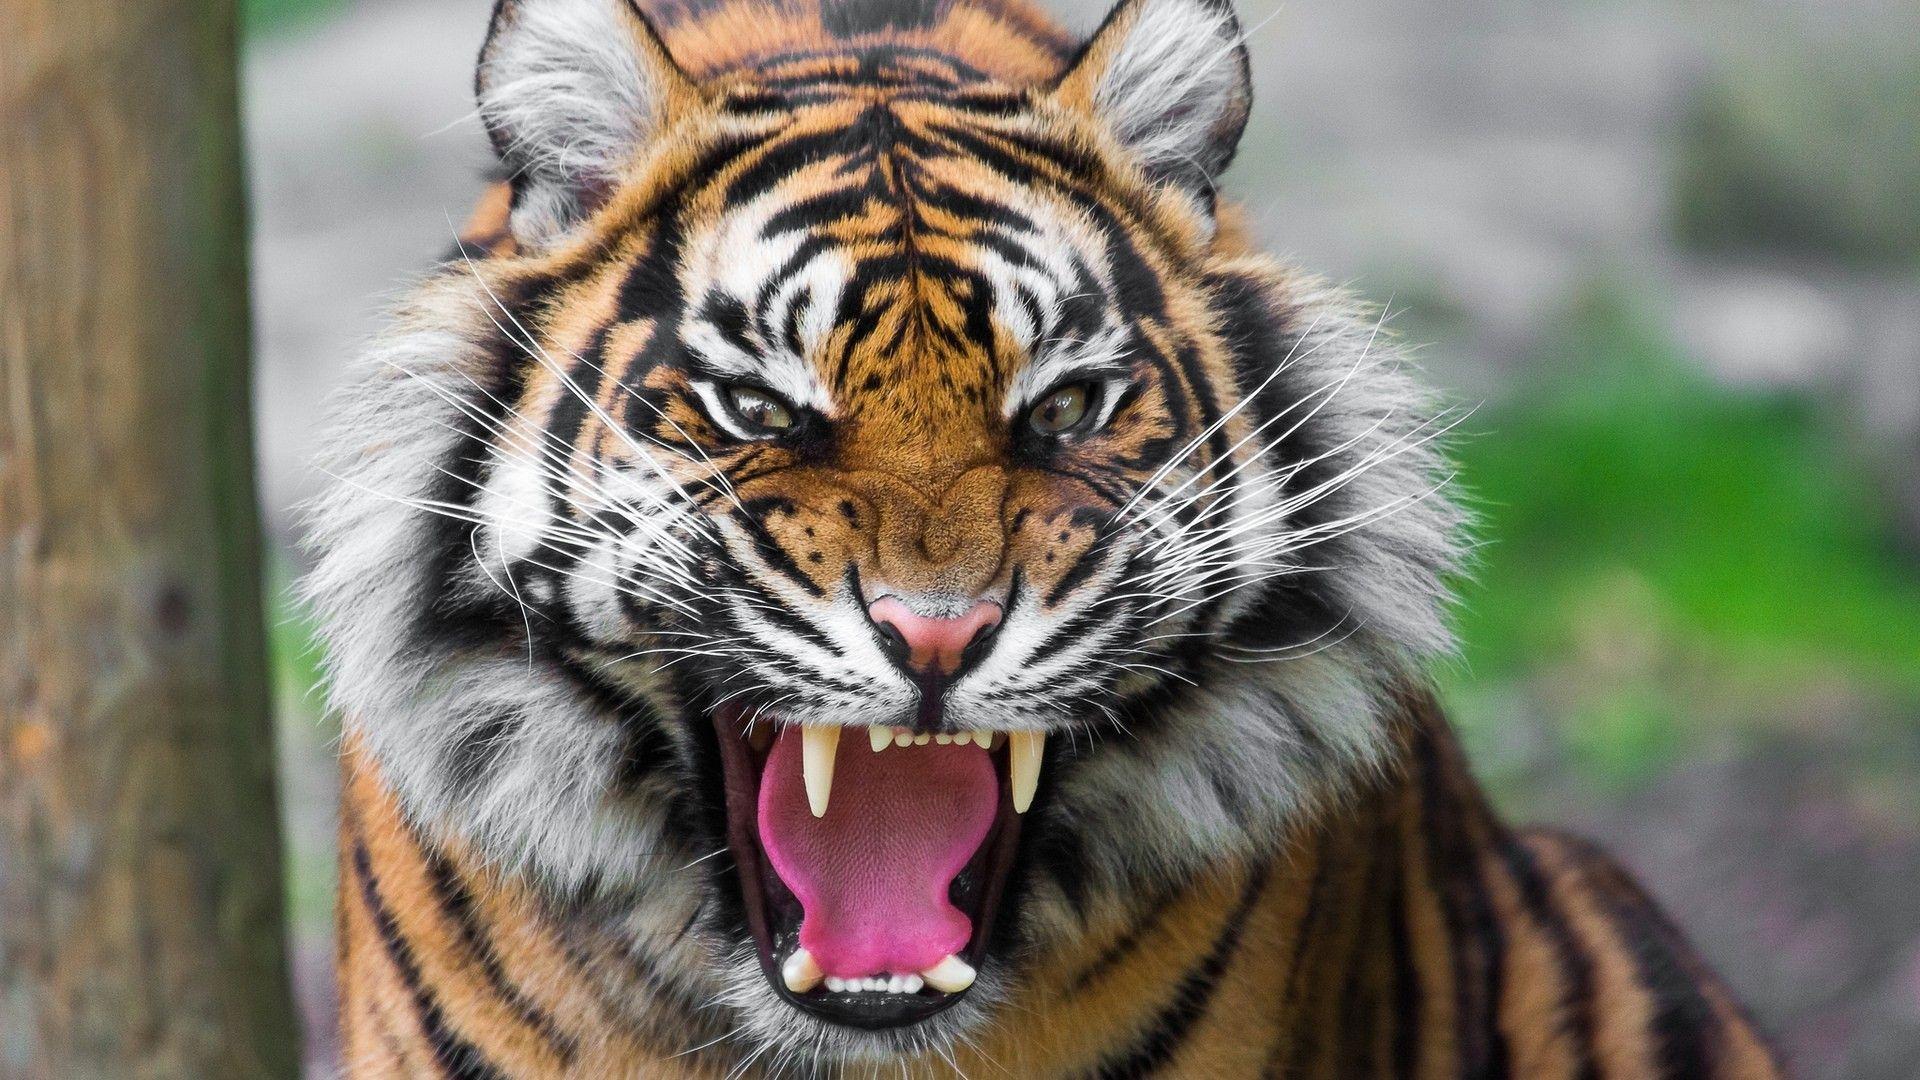 Angry Tiger Wallpaper HD. HD Desktop Background